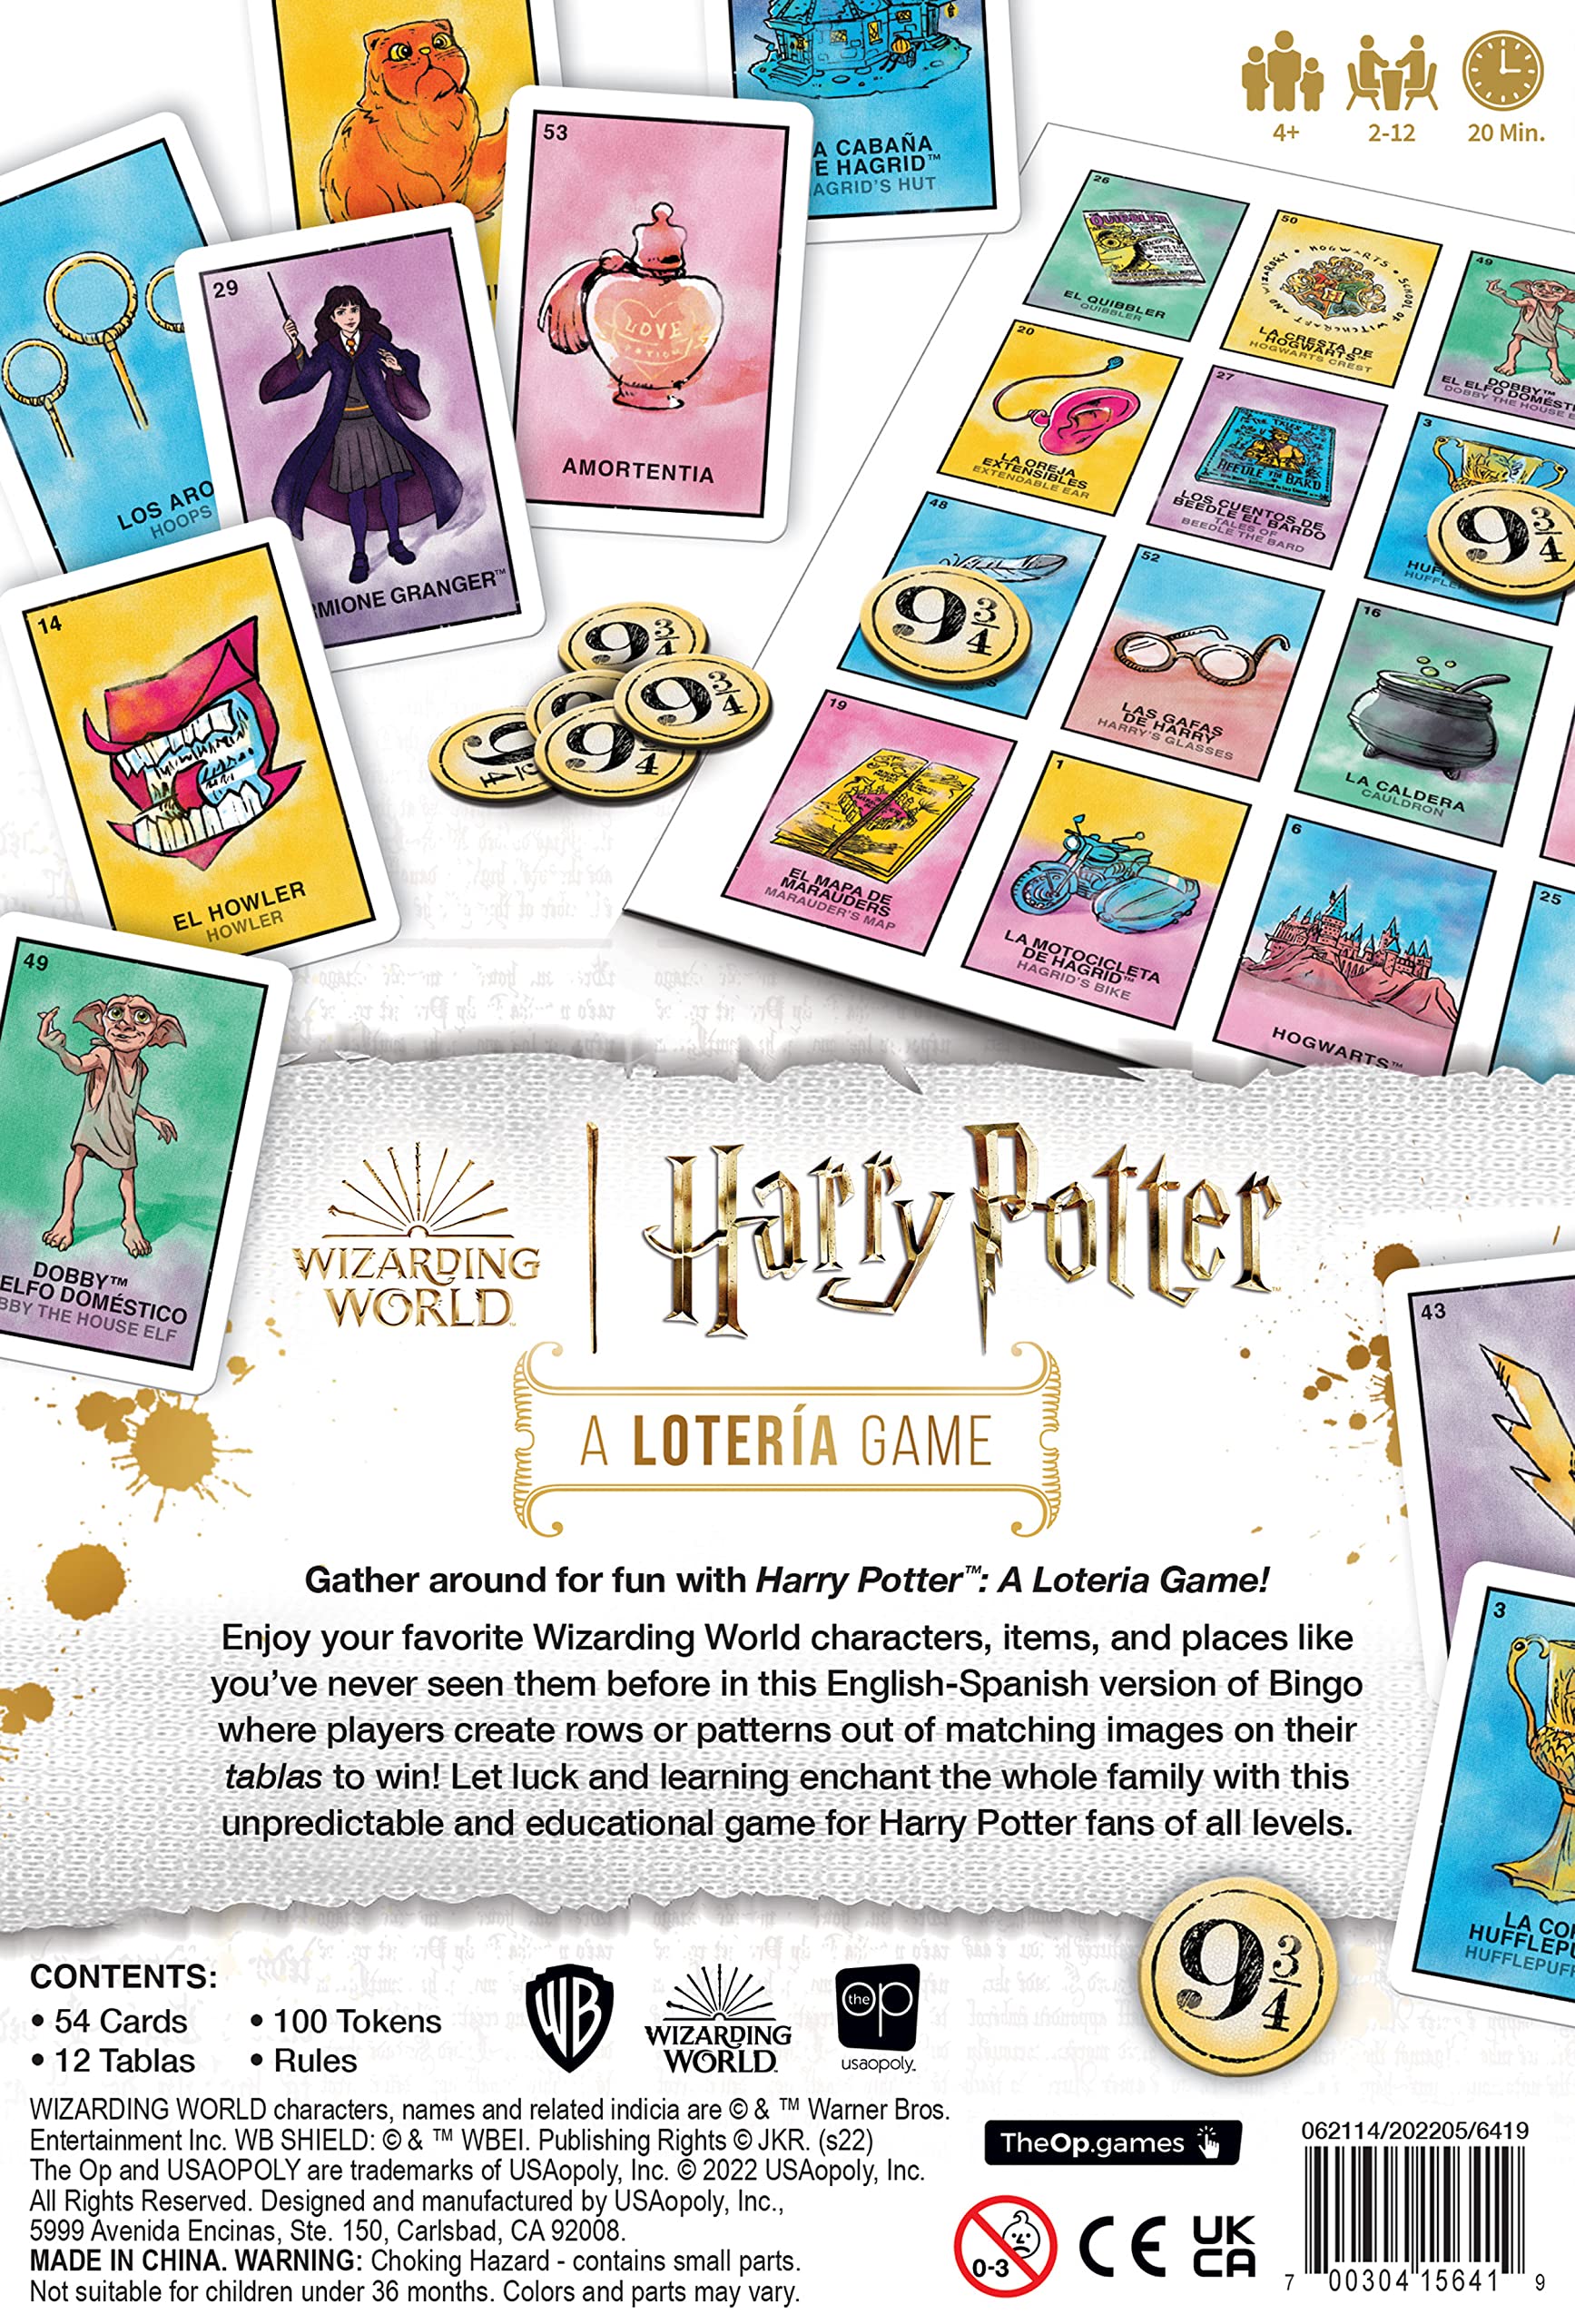 Harry Potter Loteria | Traditional Loteria Mexicana Game of Chance | Bingo Style Game Featuring Custom Artwork & Illustrations from Harry Potter Films | Inspired by Spanish Words & Mexican Culture